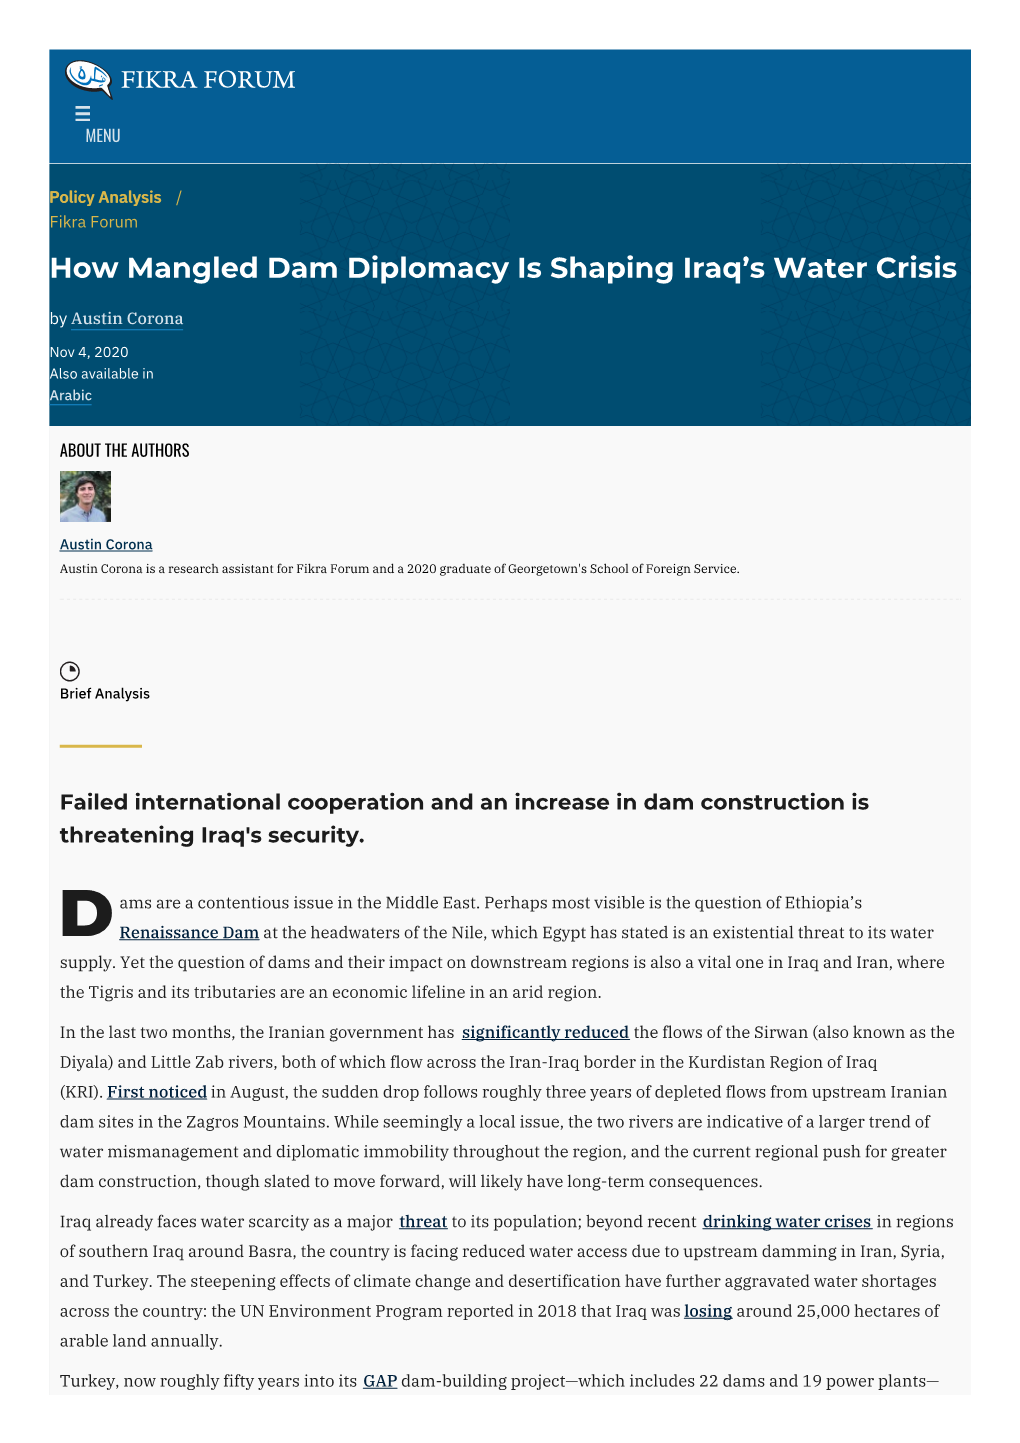 How Mangled Dam Diplomacy Is Shaping Iraq's Water Crisis